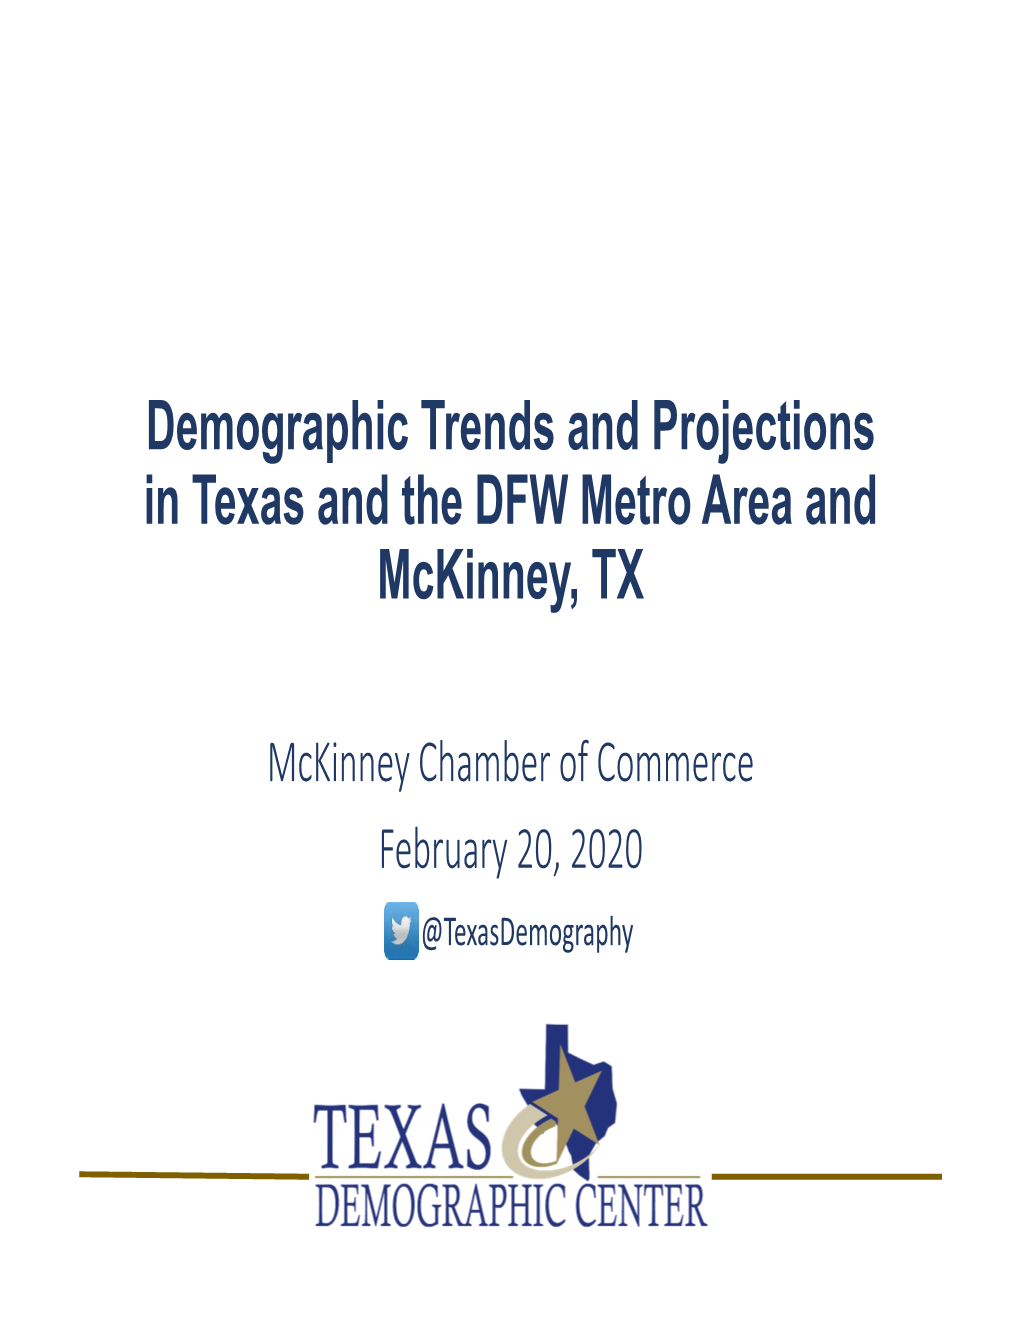 Demographic Trends and Projections in Texas and the DFW Metro Area and Mckinney, TX